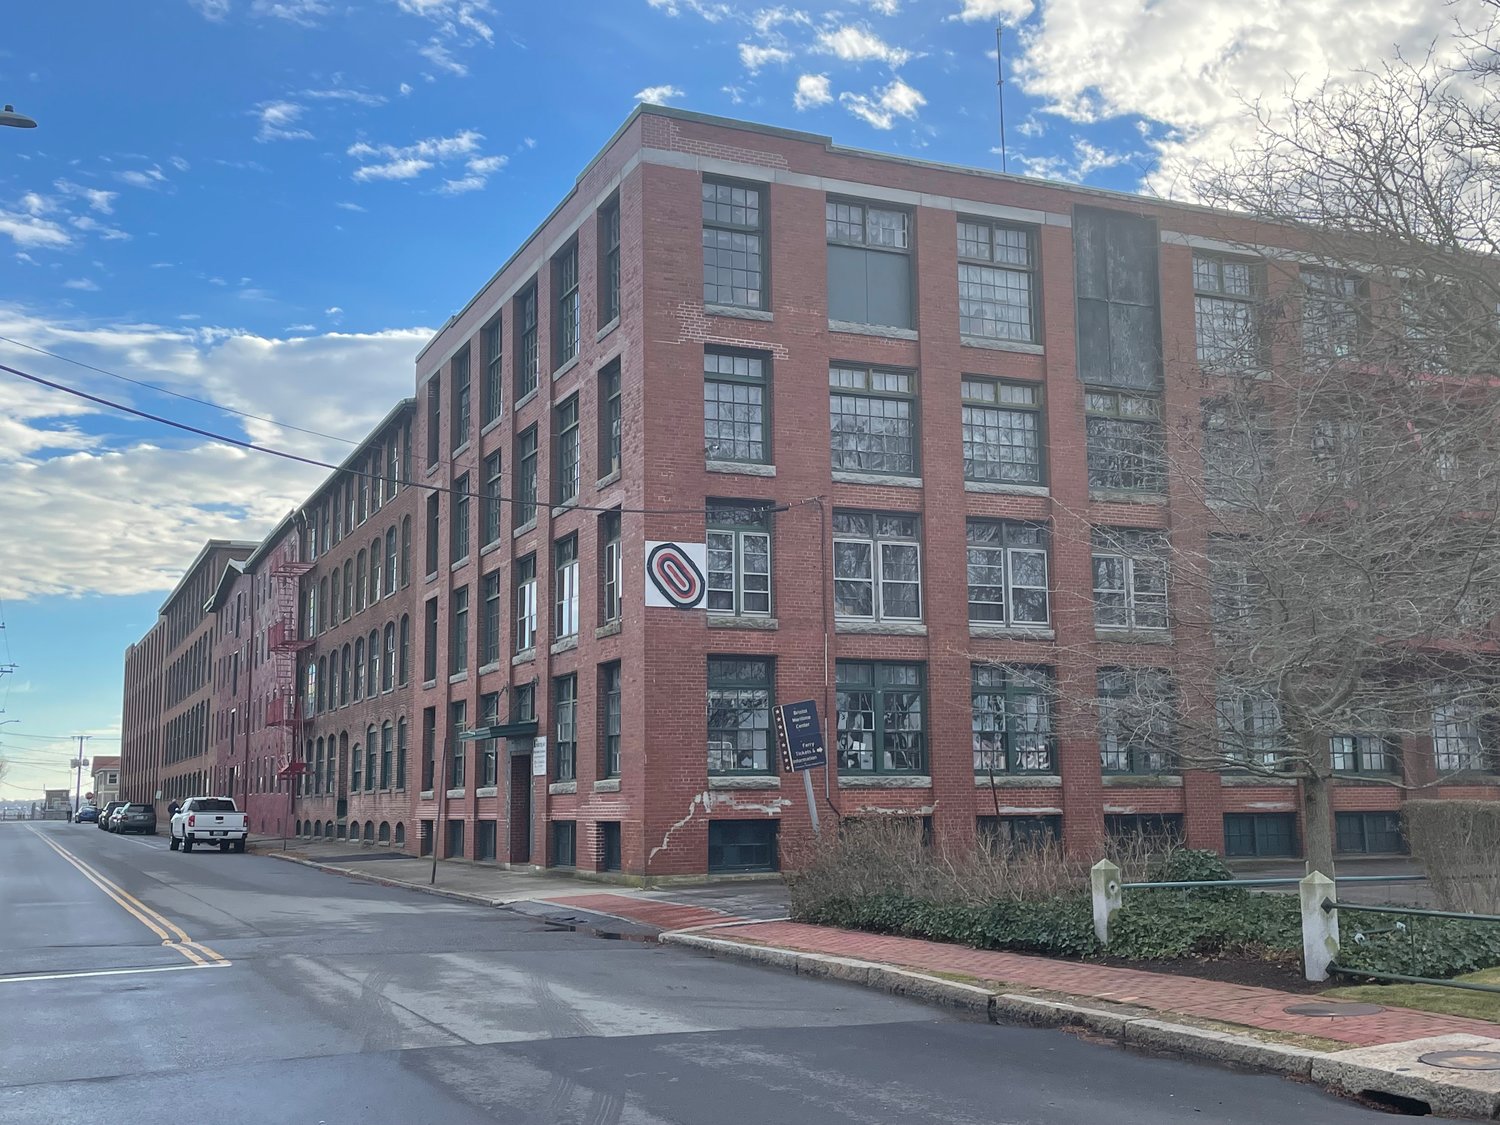 The proposed Bristol Yarn Mill development, located at the site of the former Robin Rug factory, received Master Plan approval from the Bristol Planning Board by a 3-2 vote.